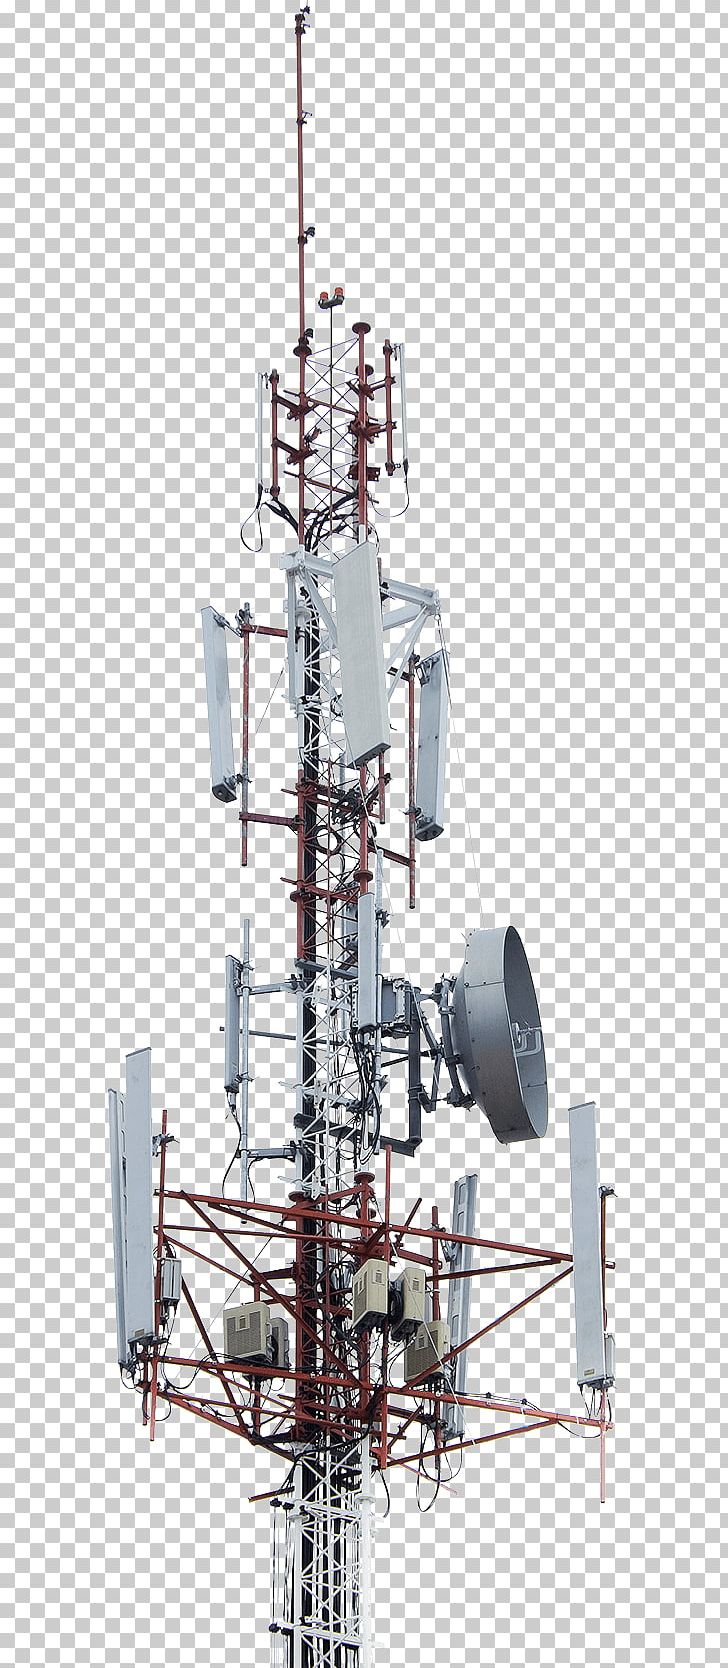 Aerials Wireless G-Shock Telecommunications Tower MIMO PNG, Clipart, Aerials, Antenna, Broadband, Casio, Electronics Free PNG Download